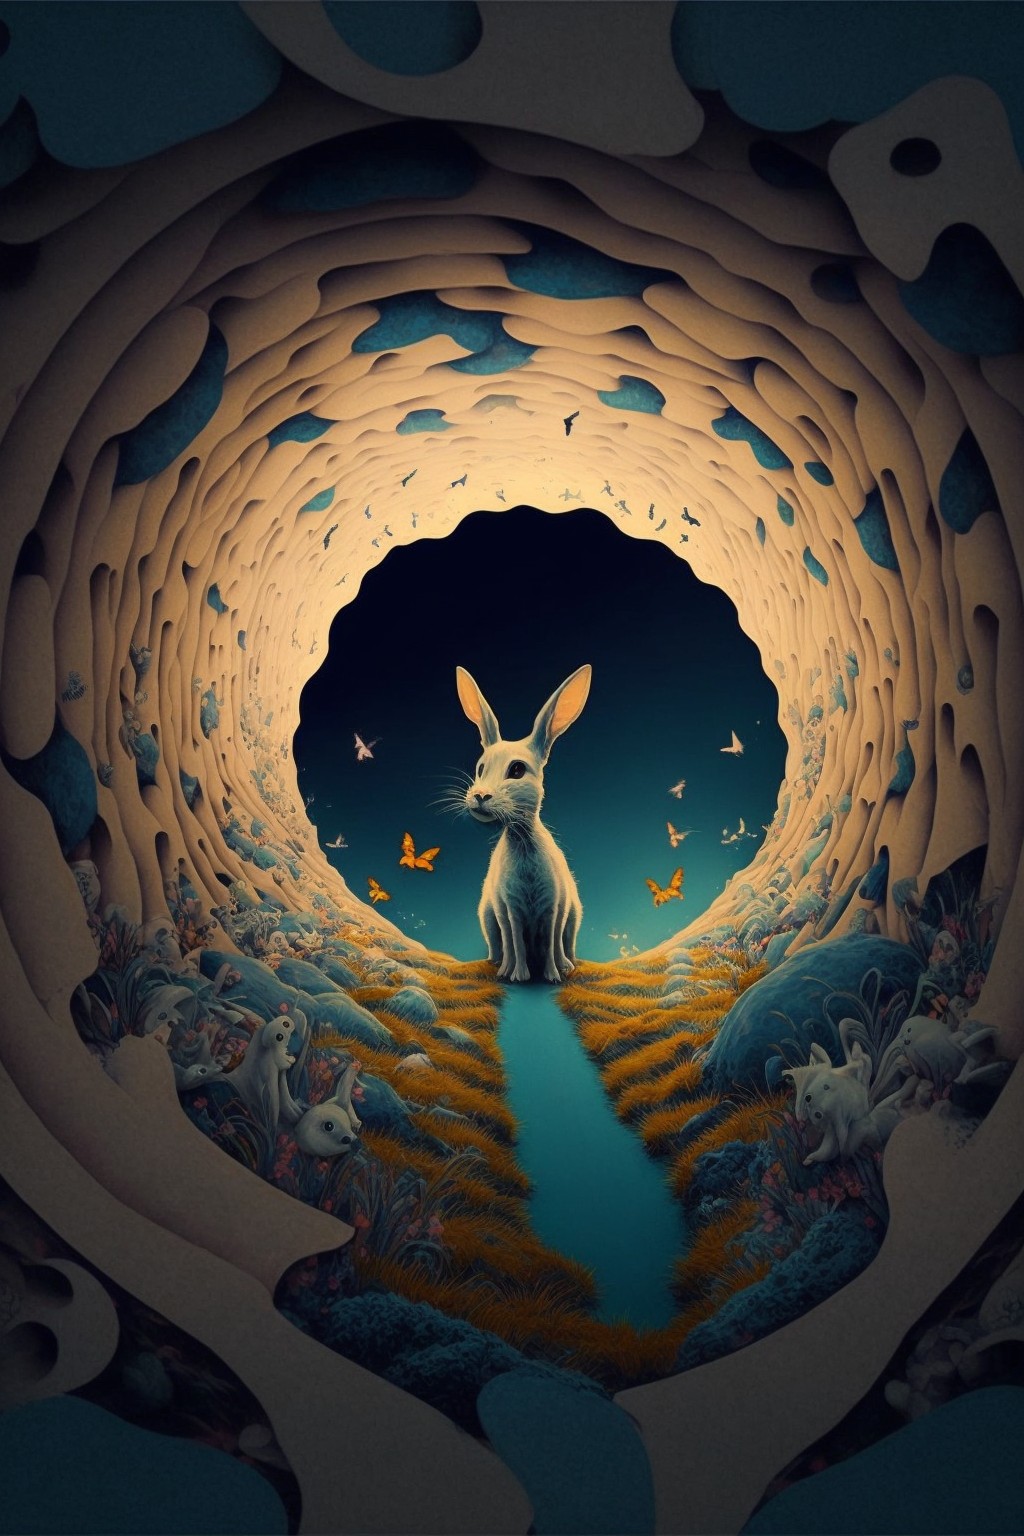 7 images of The rabbit who finally found the exit in the psychedelic cave by Midjourney